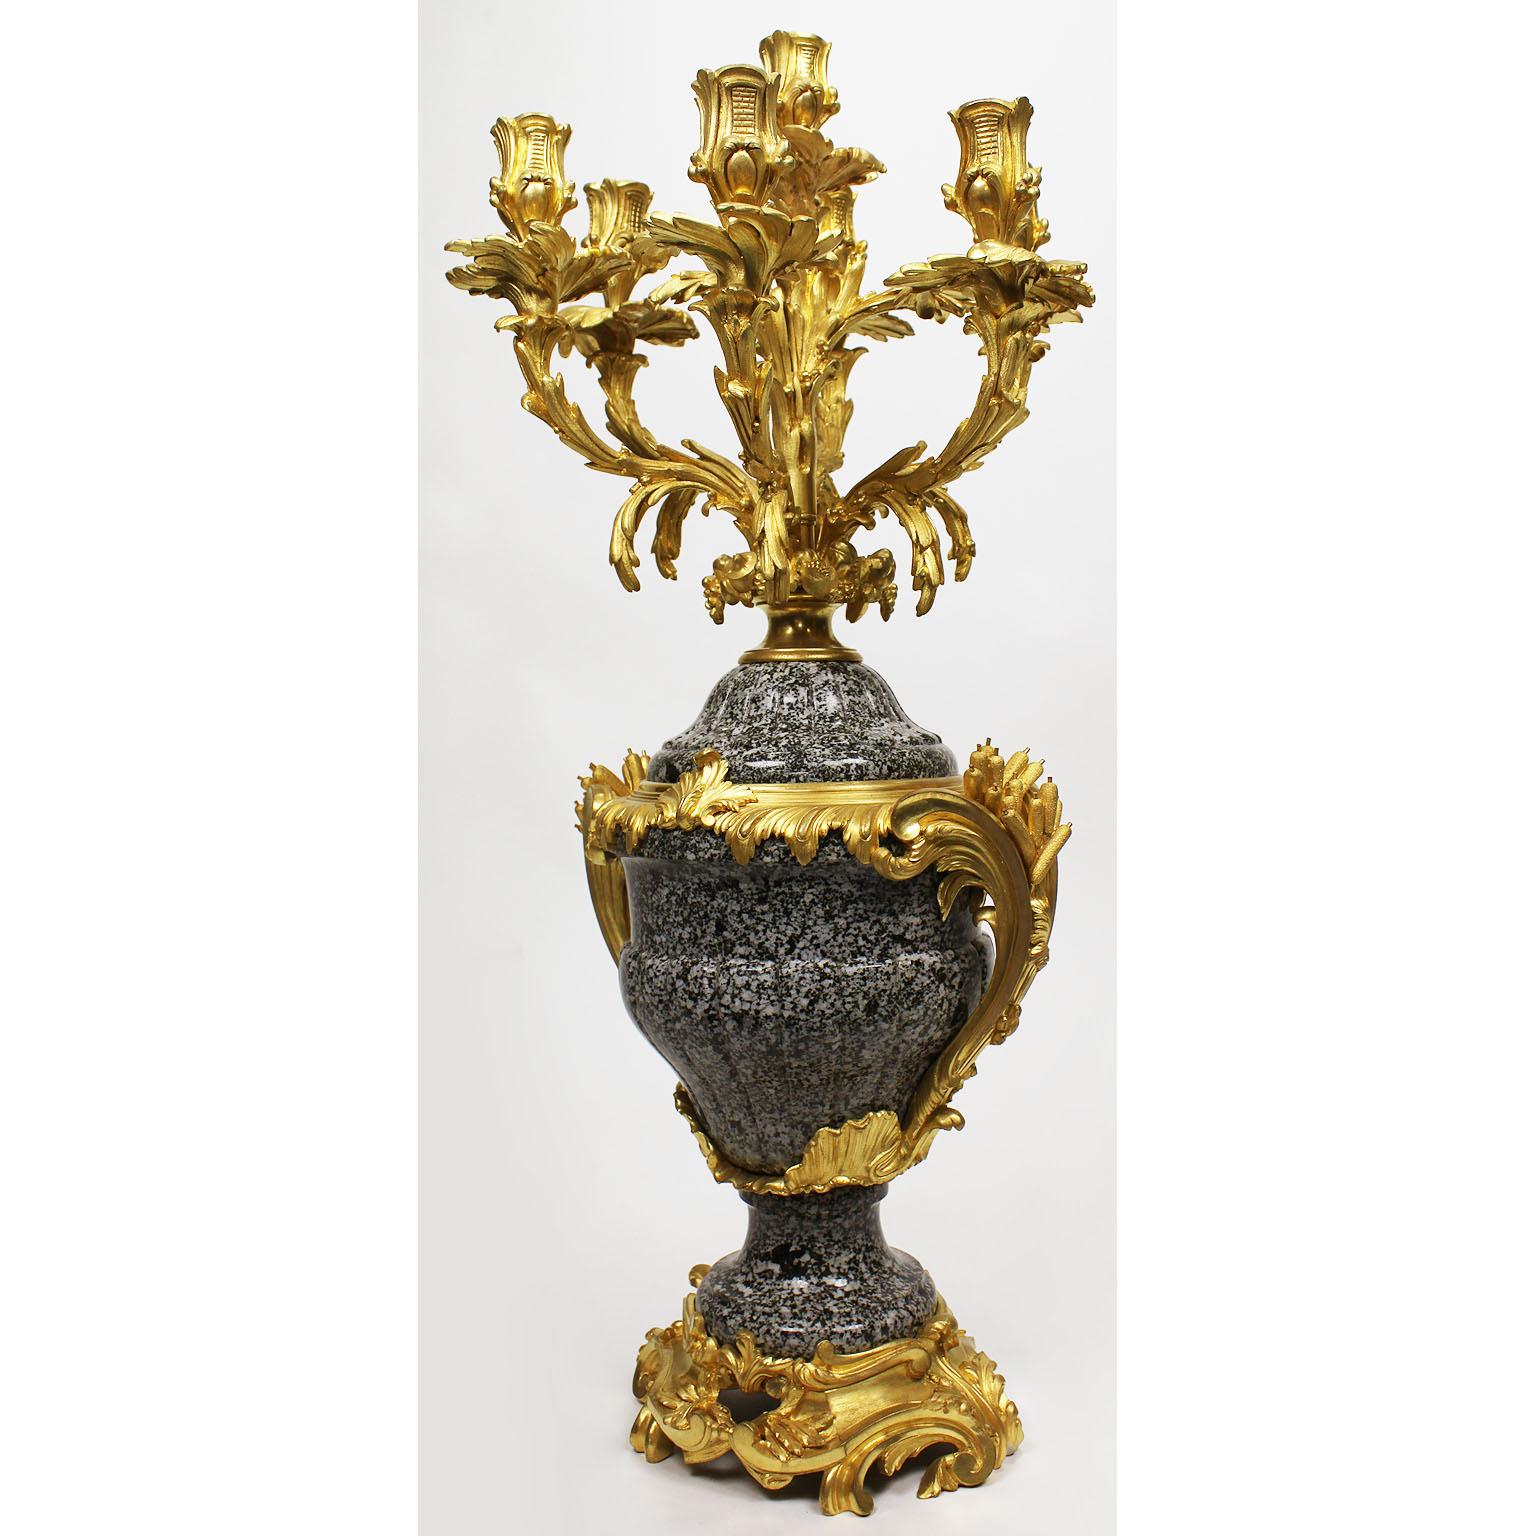 A very fine French 19th-20th century Louis XV style ormolu-mounted mottled granite-marble urn seven-light candelabra, attributed to François Linke (1855-1946). The tapering ovoid body applied with a pair of scrolled handles cast with